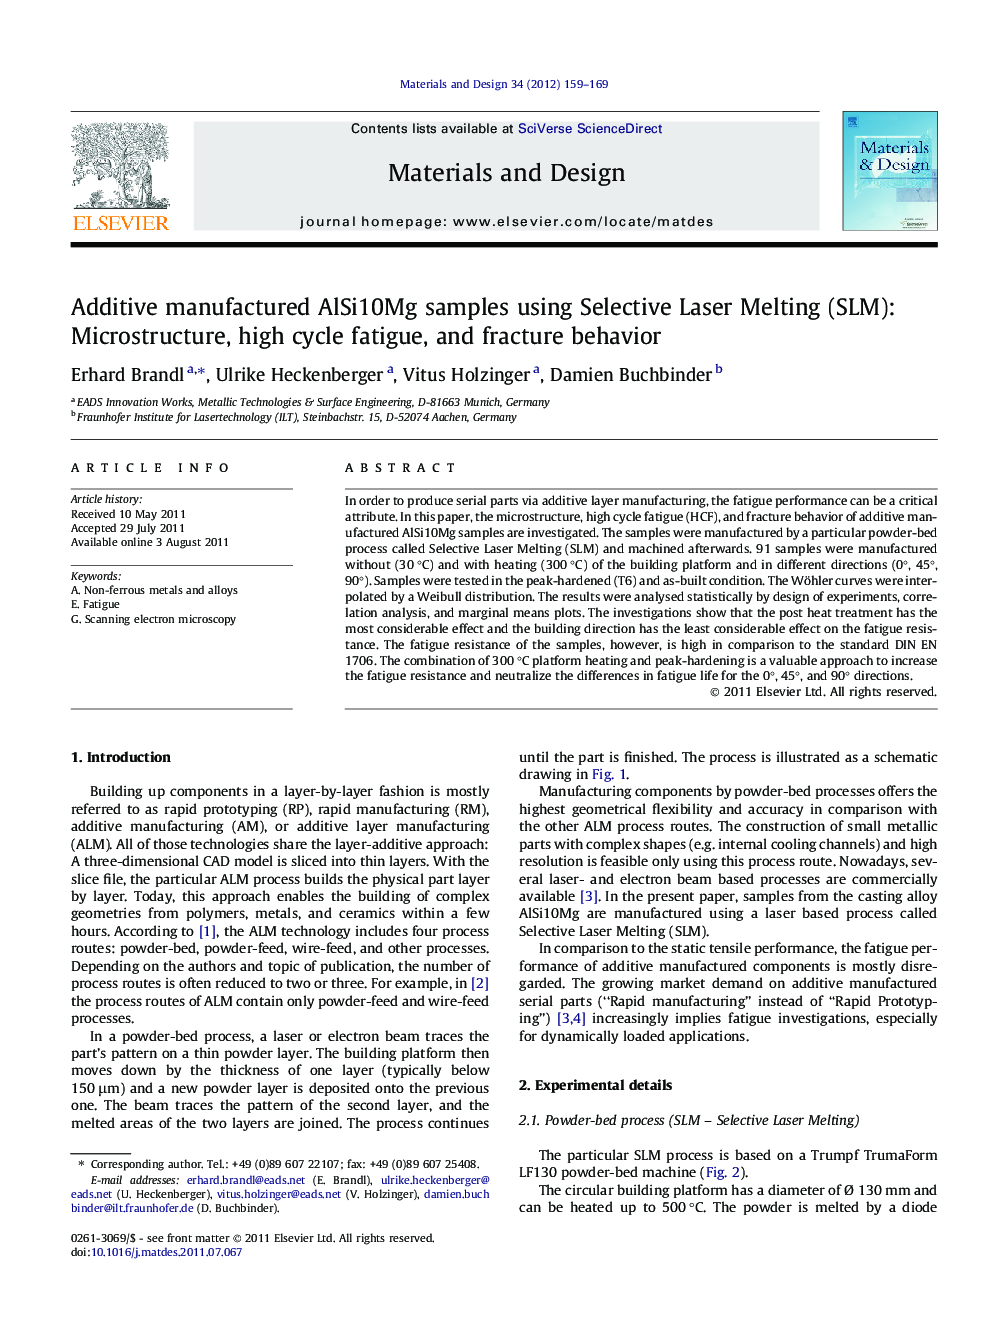 Additive manufactured AlSi10Mg samples using Selective Laser Melting (SLM): Microstructure, high cycle fatigue, and fracture behavior